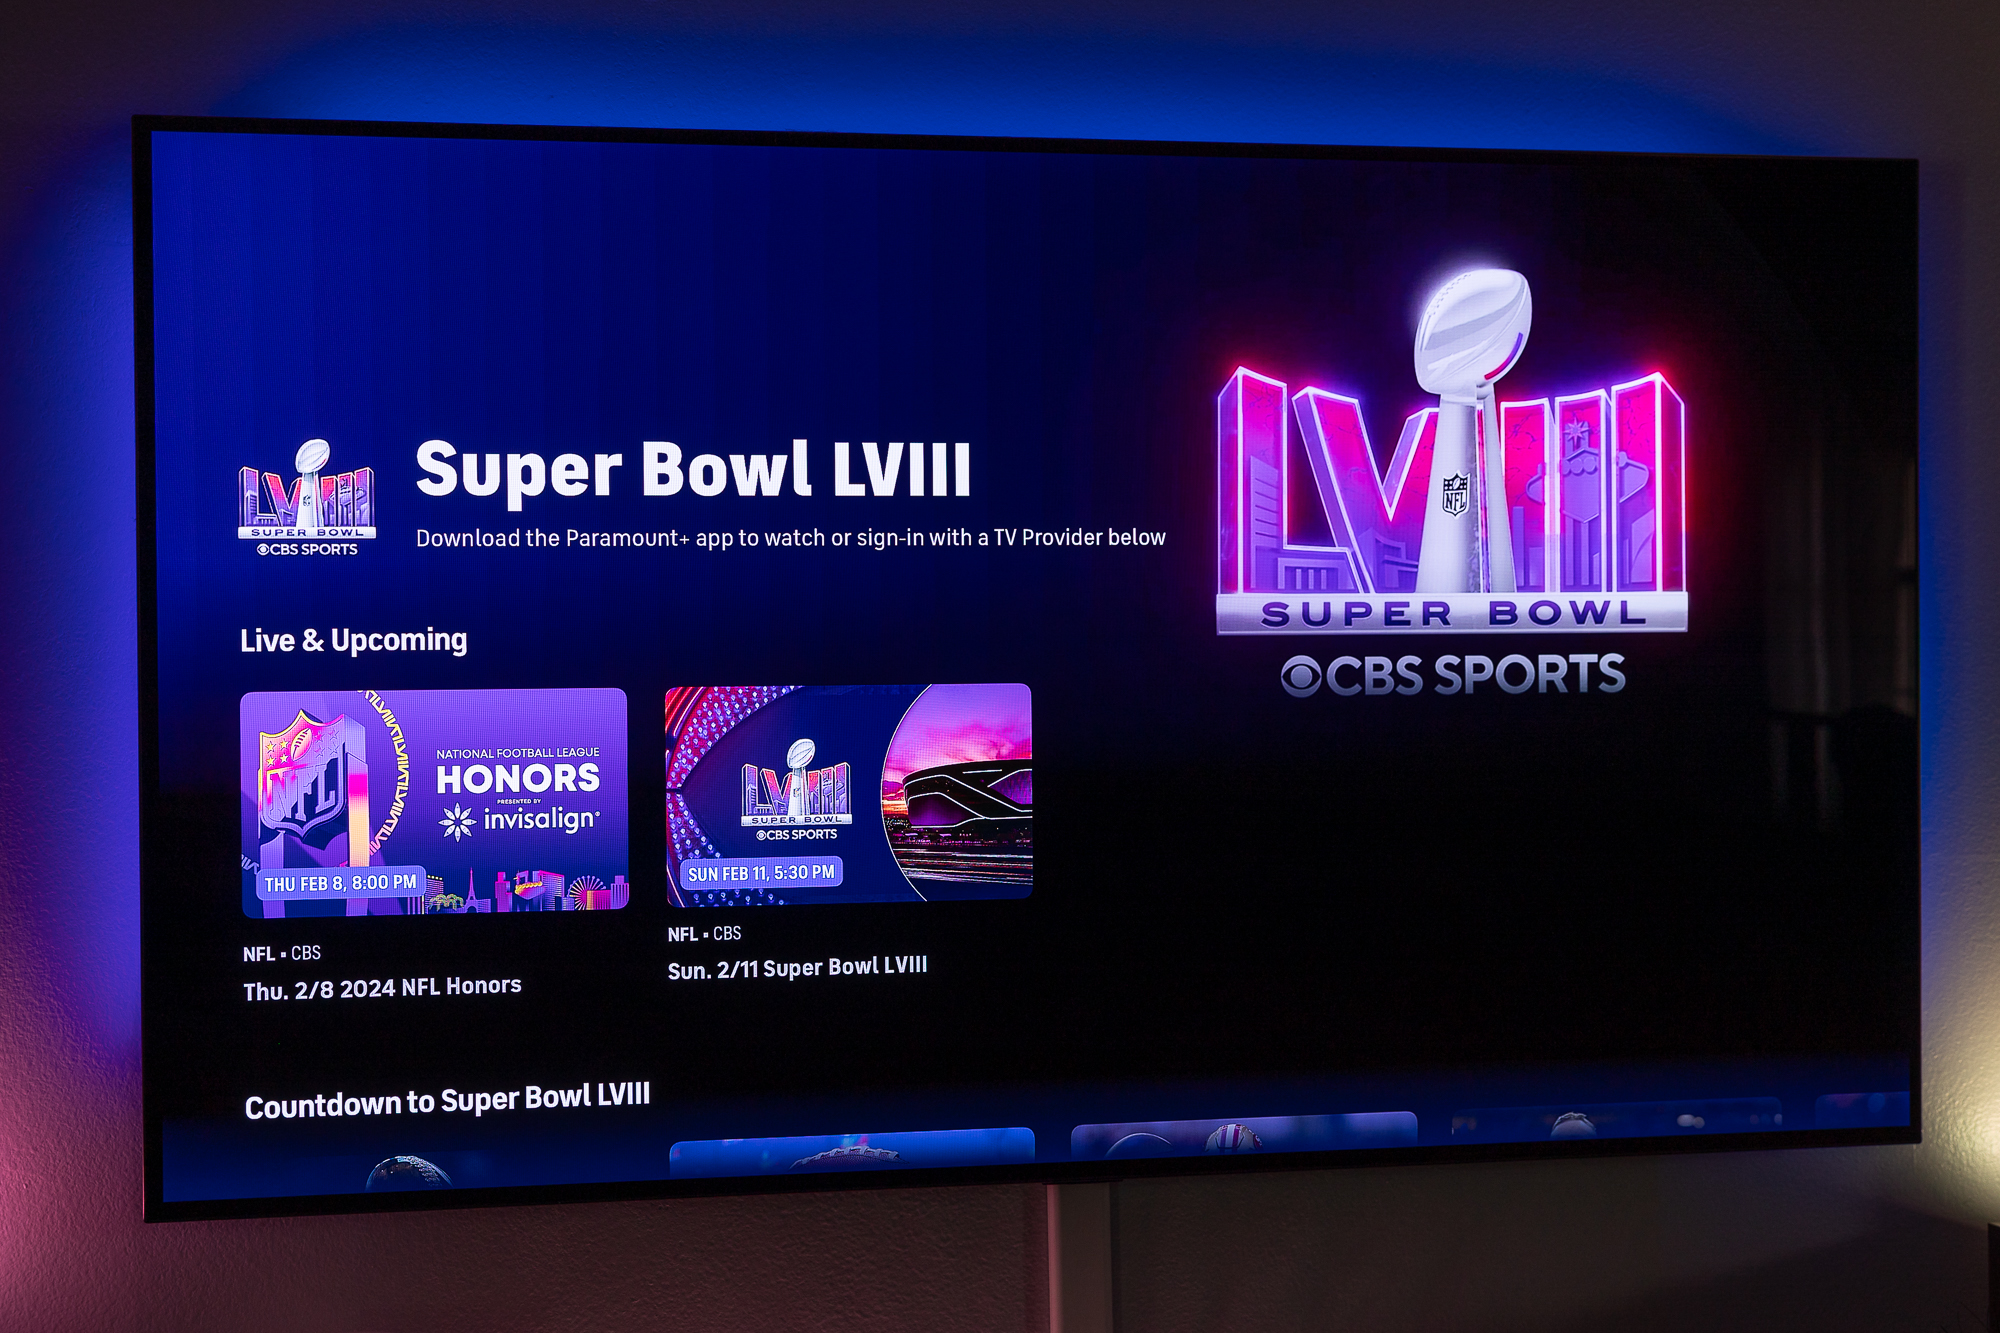 Everything you need to know about going to Super Bowl LVIII